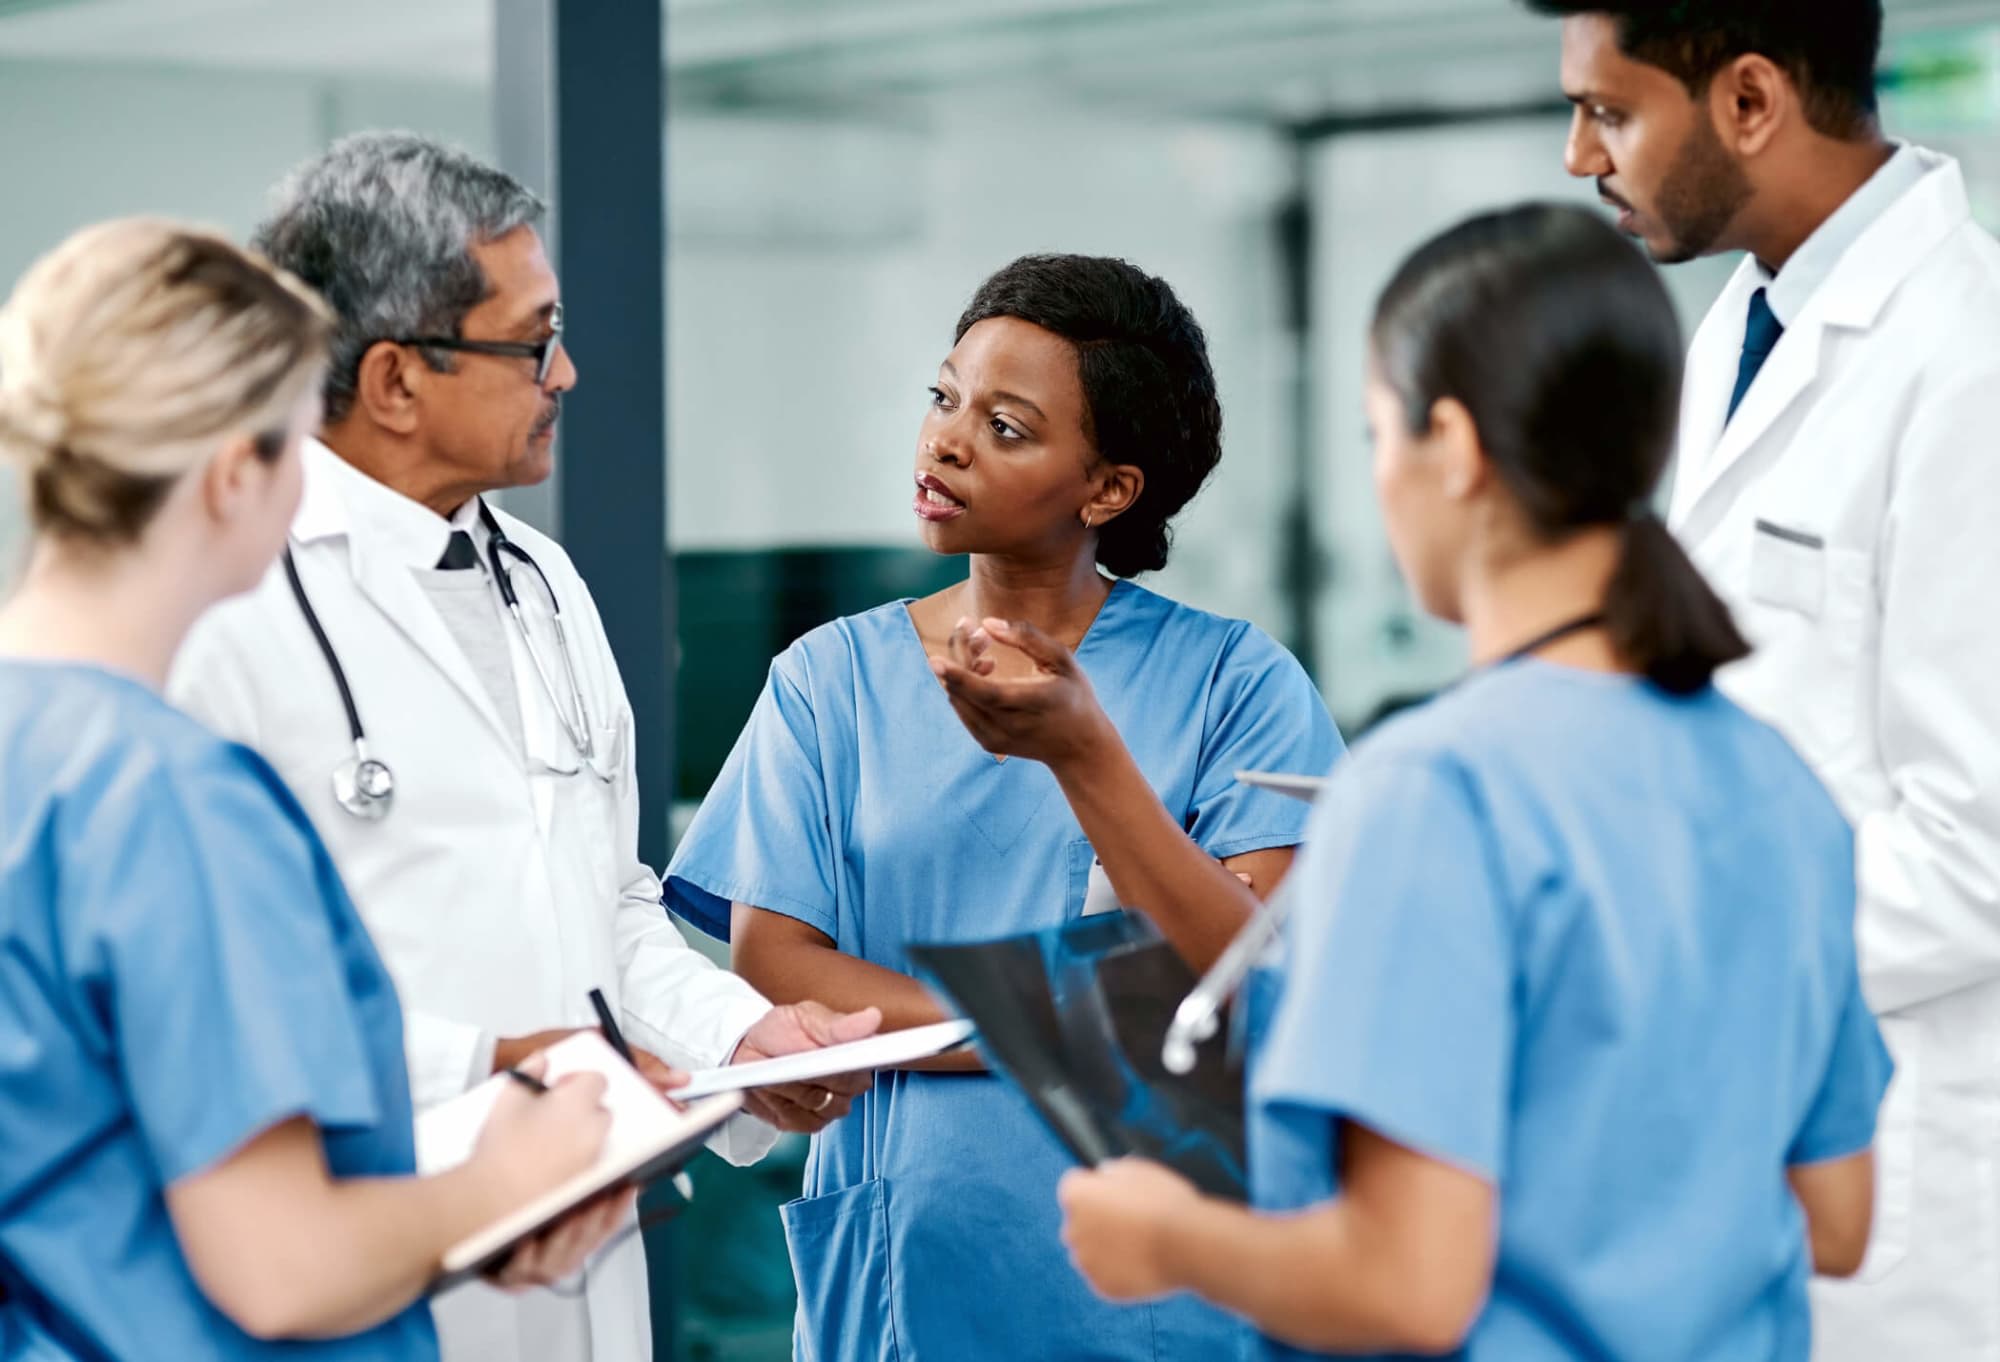 Group of nurses having a discussion